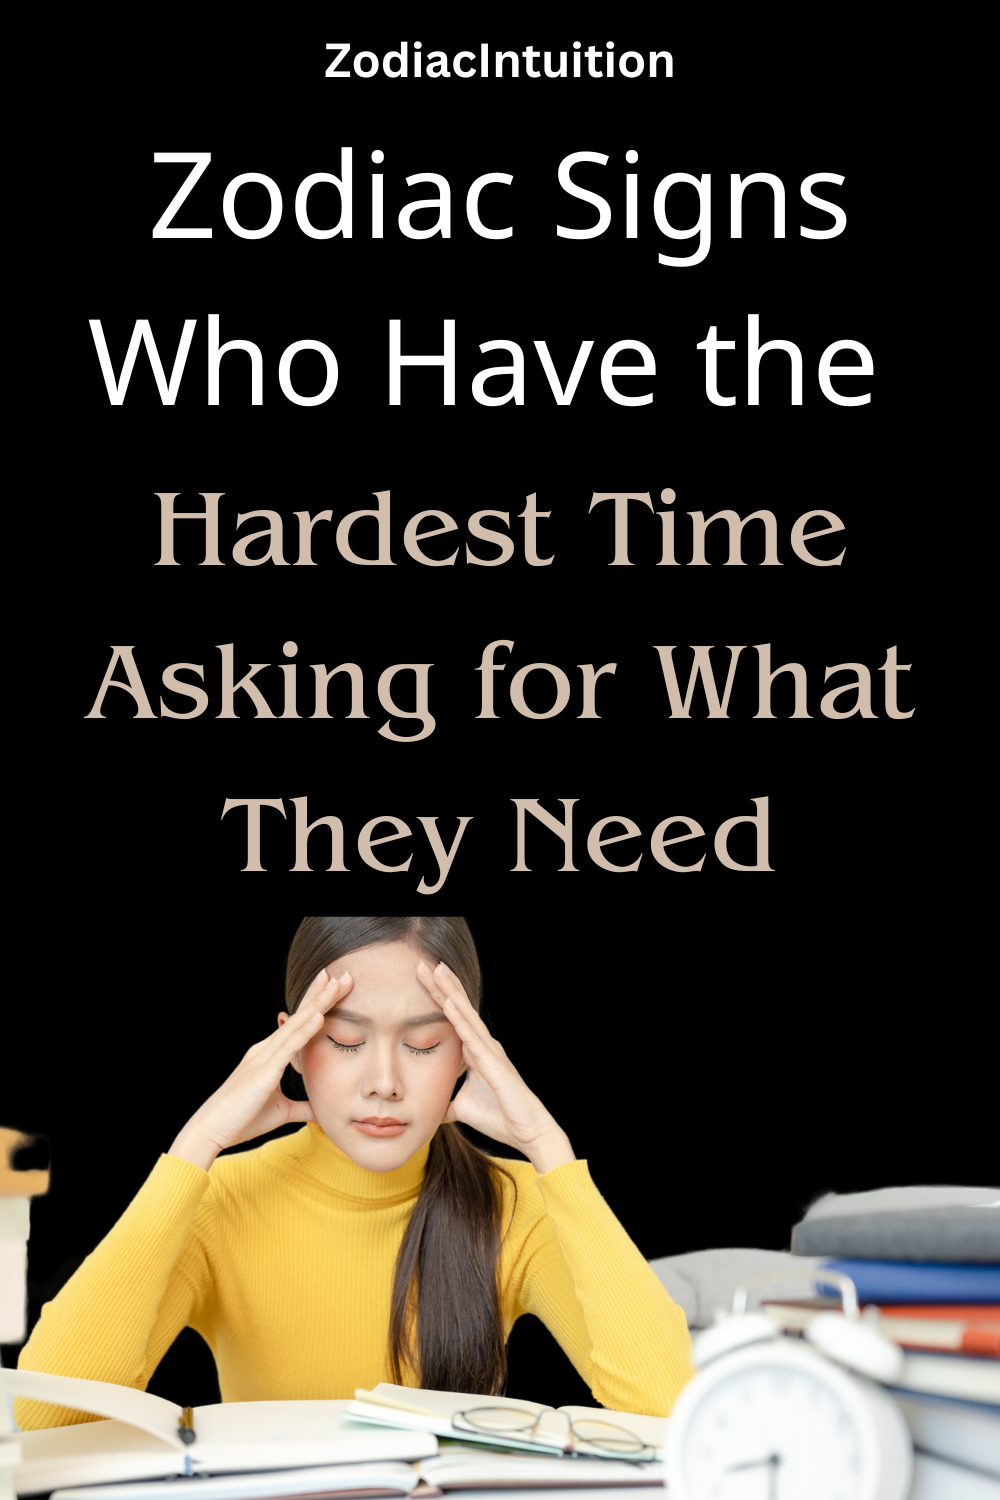 Zodiac Signs Who Have the Hardest Time Asking for What They Need